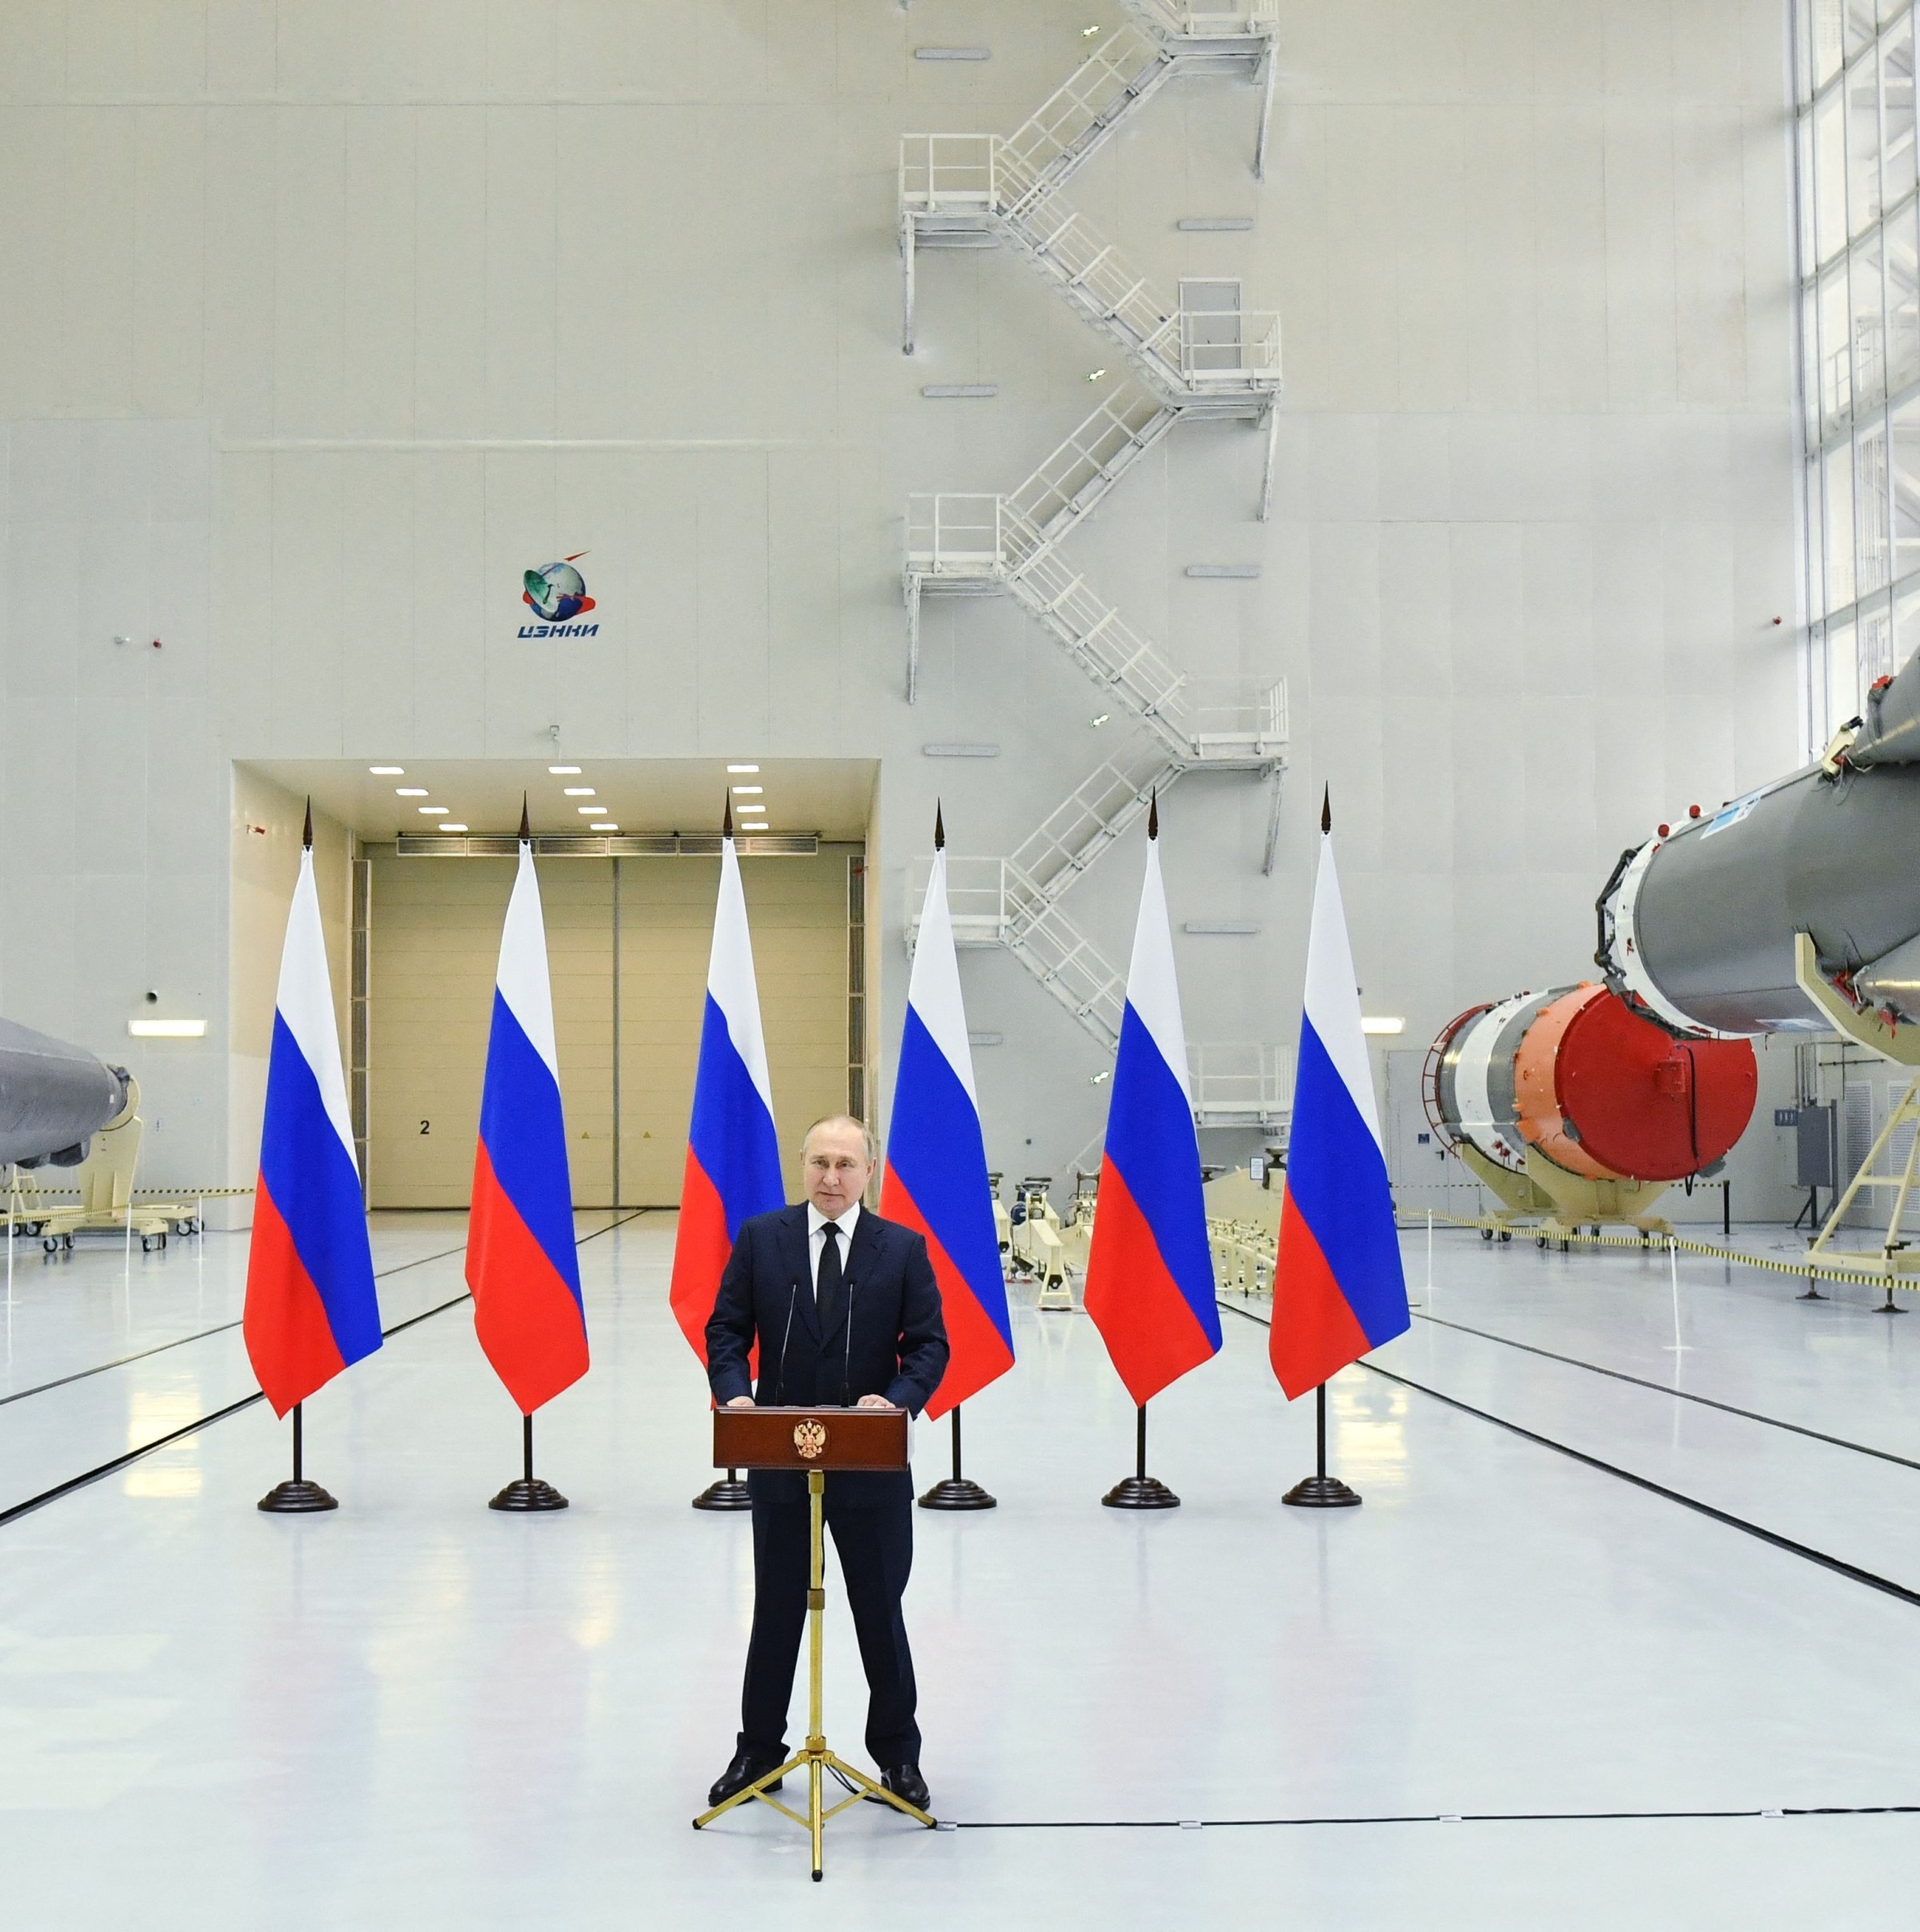 How worried should we be about Russia putting a nuke in space?